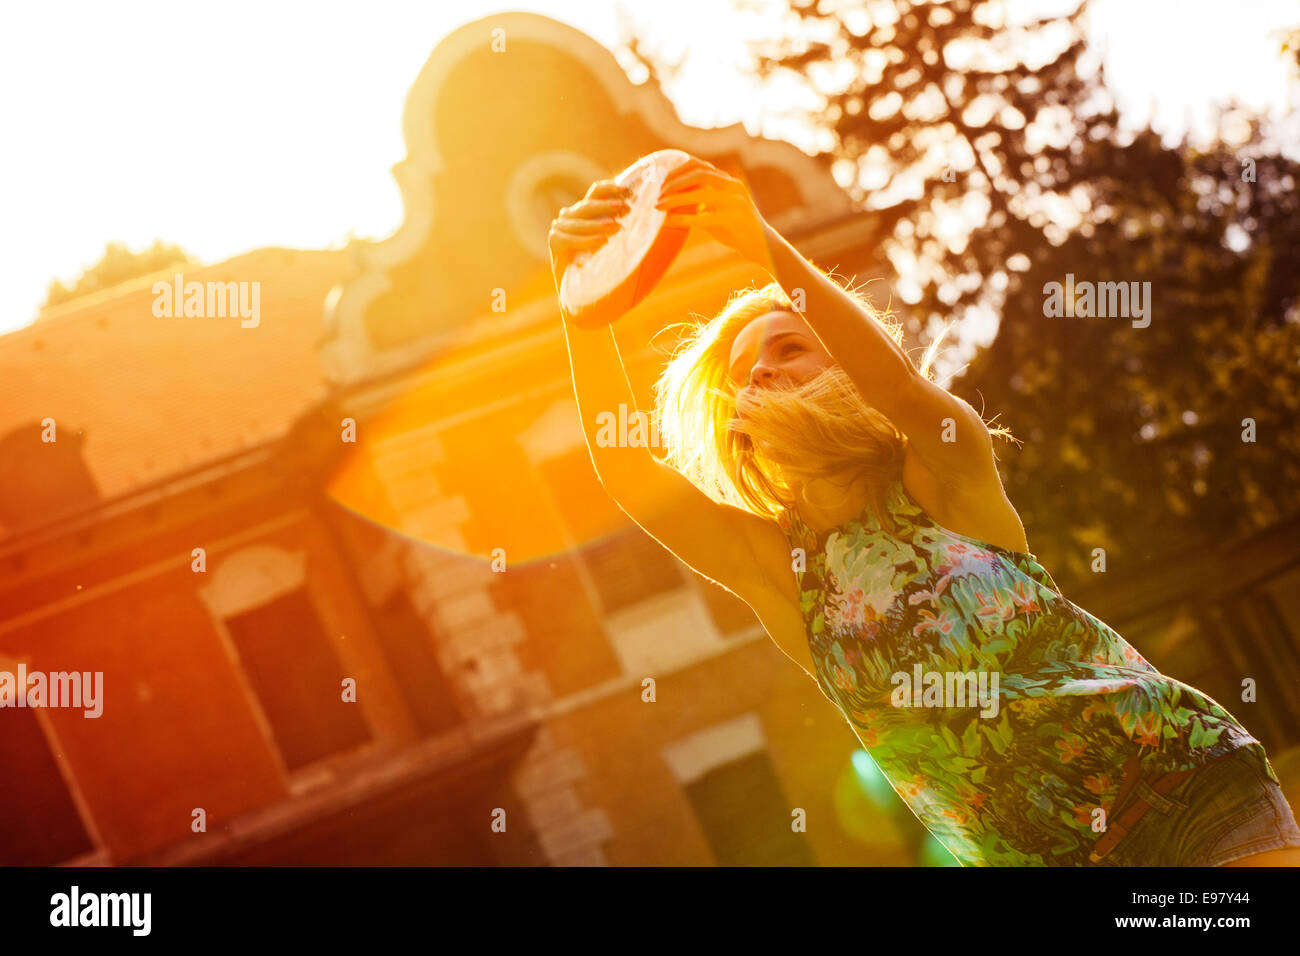 Young woman playing frisbee outdoors with back light Stock Photo